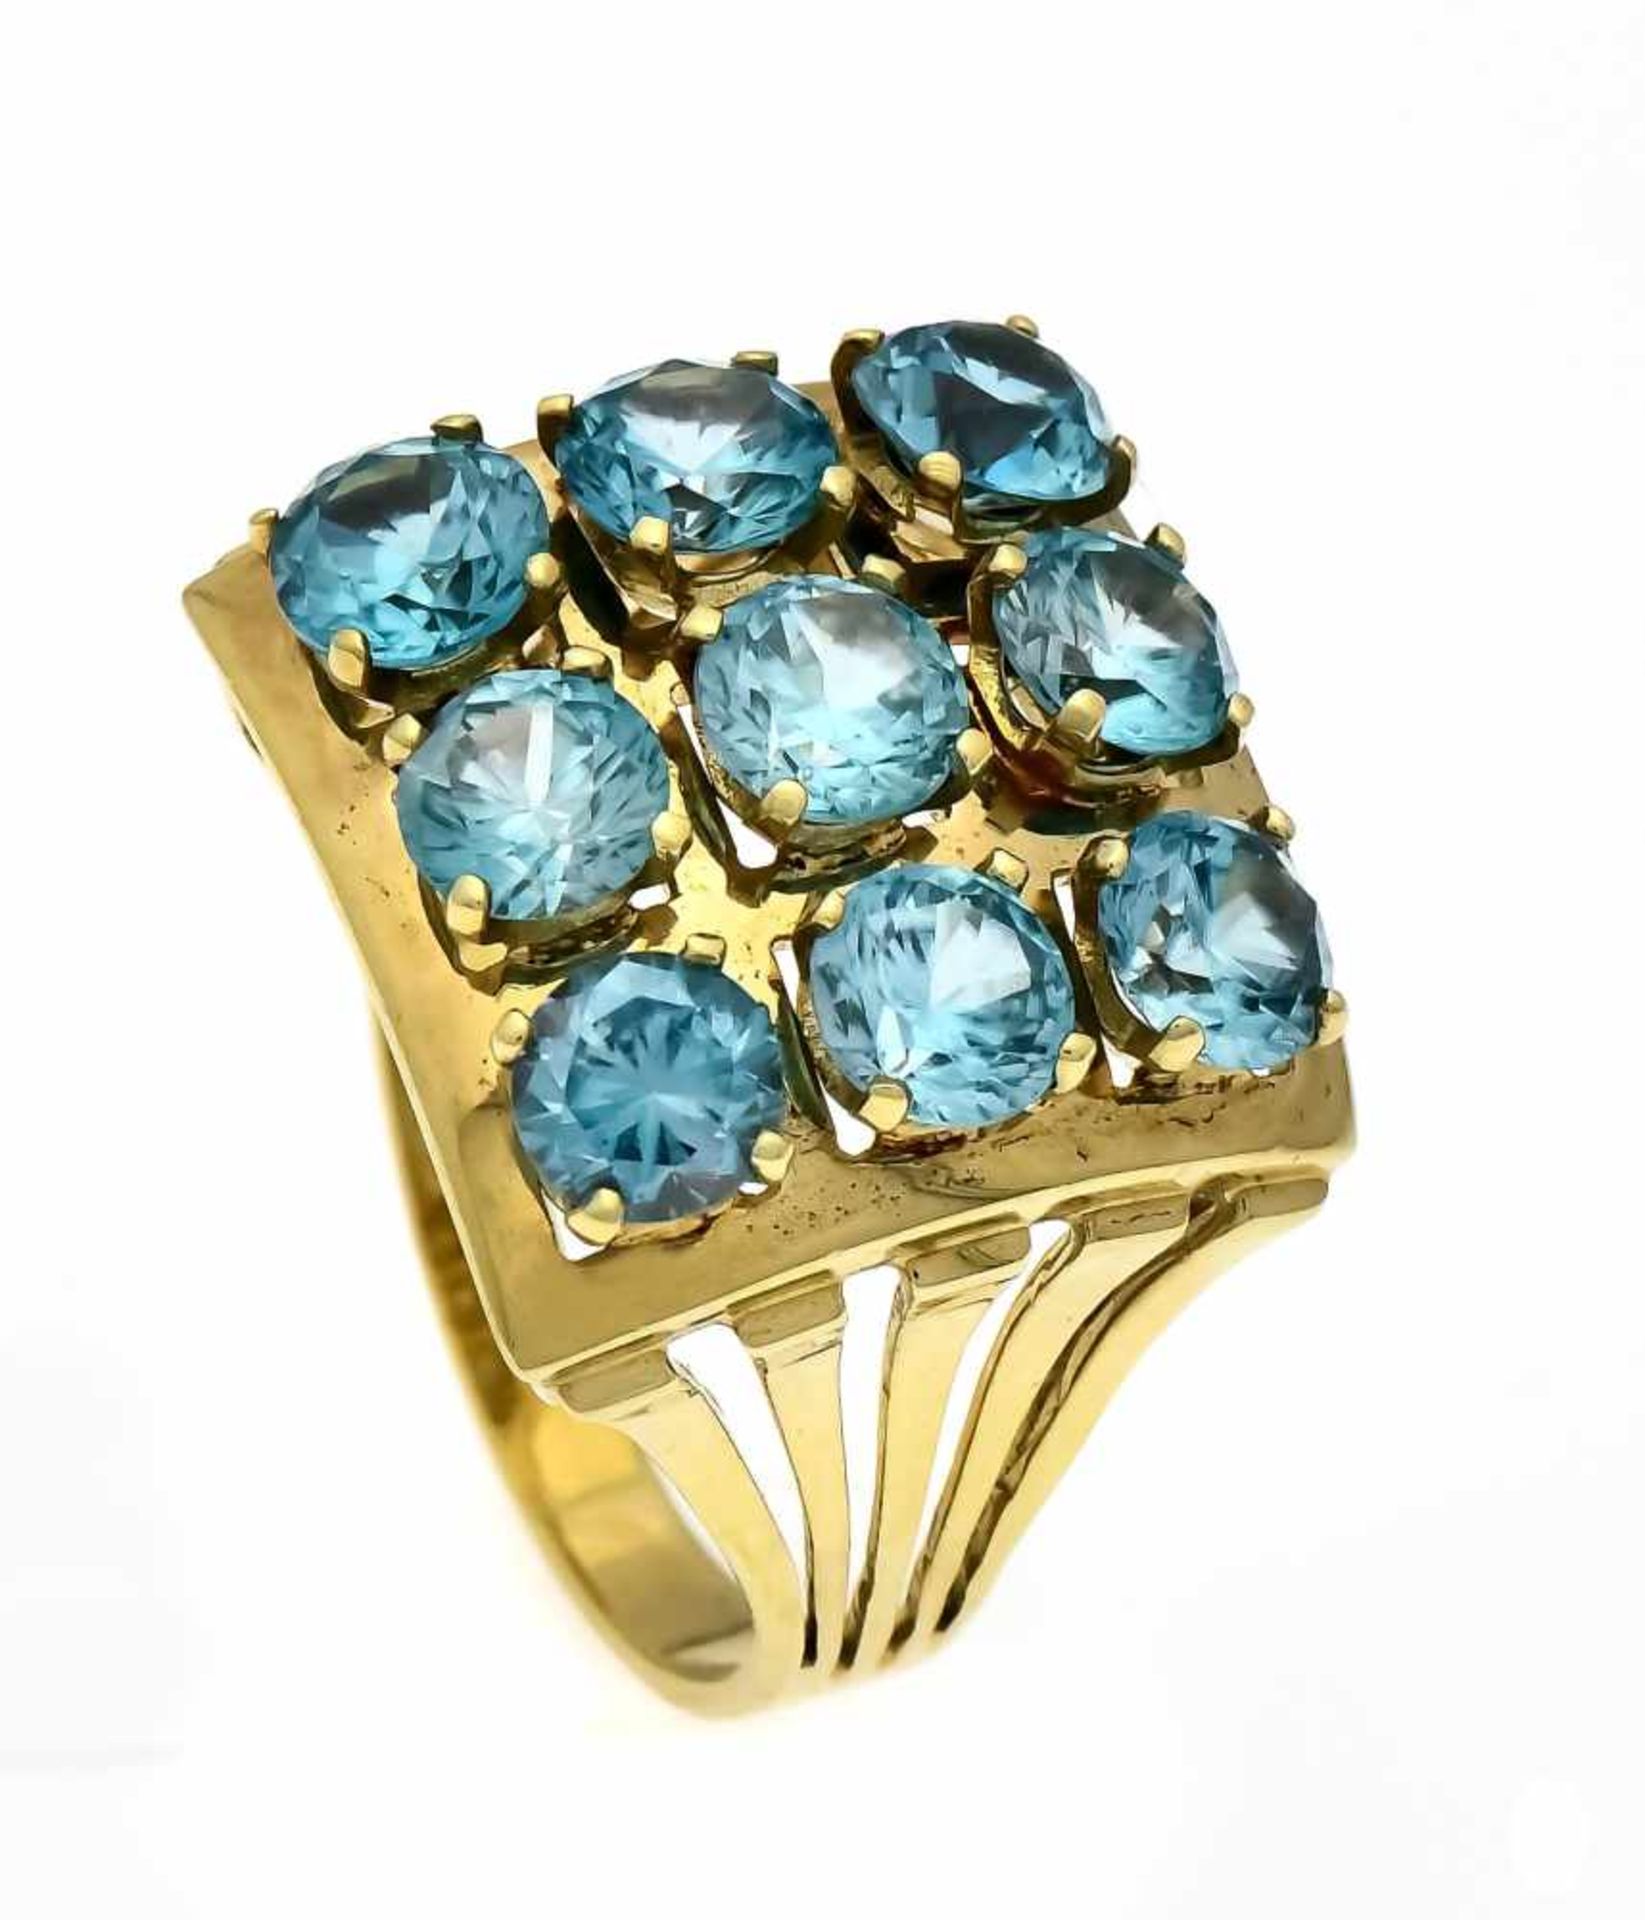 Zircon ring GG 585/000 with 9 round fac., Blue zircon 5 mm in good color, ring size 60,